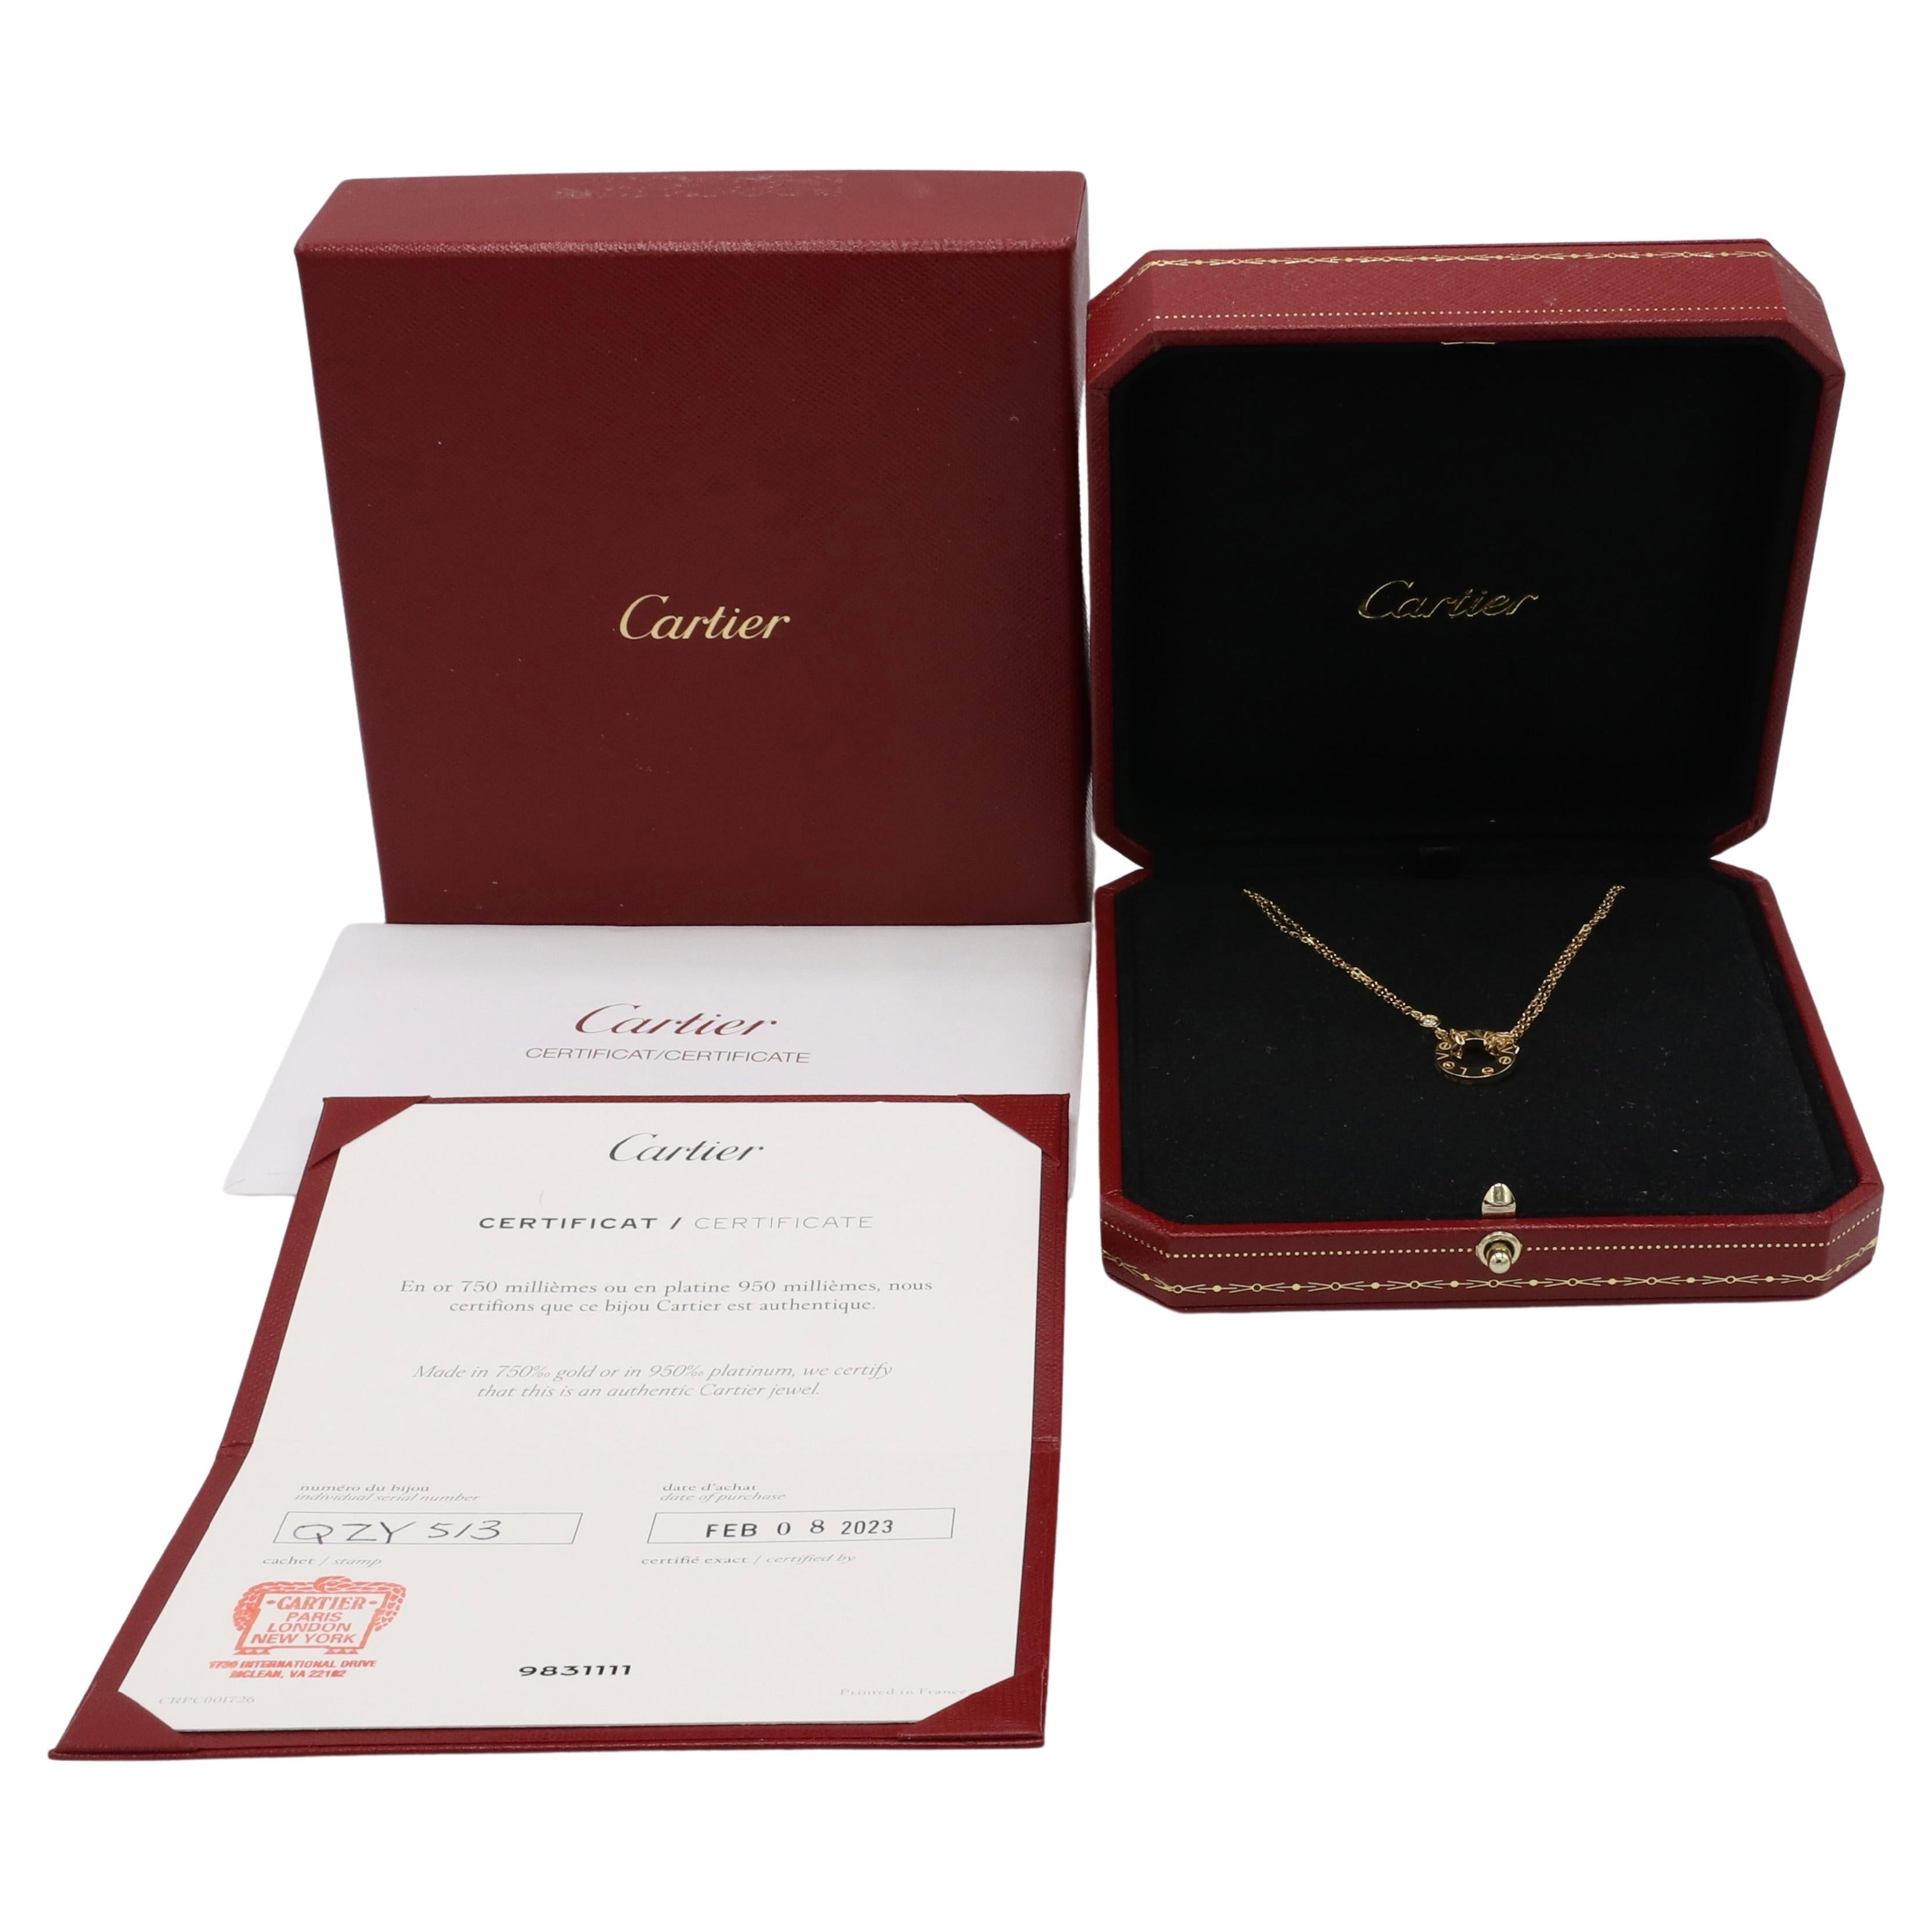 Cartier Two Diamond Love Necklace 18 Karat Yellow Gold 
Metal: 18 karat yellow gold
Weight: 6.2 grams
Diamonds: 0.03 CTW round E-F VVS natural diamonds
Chain: 15 - 16.1 inches 
Retail: $2,620 USD
Inner diameter: 0.3 inch
Notes: Box & Papers
